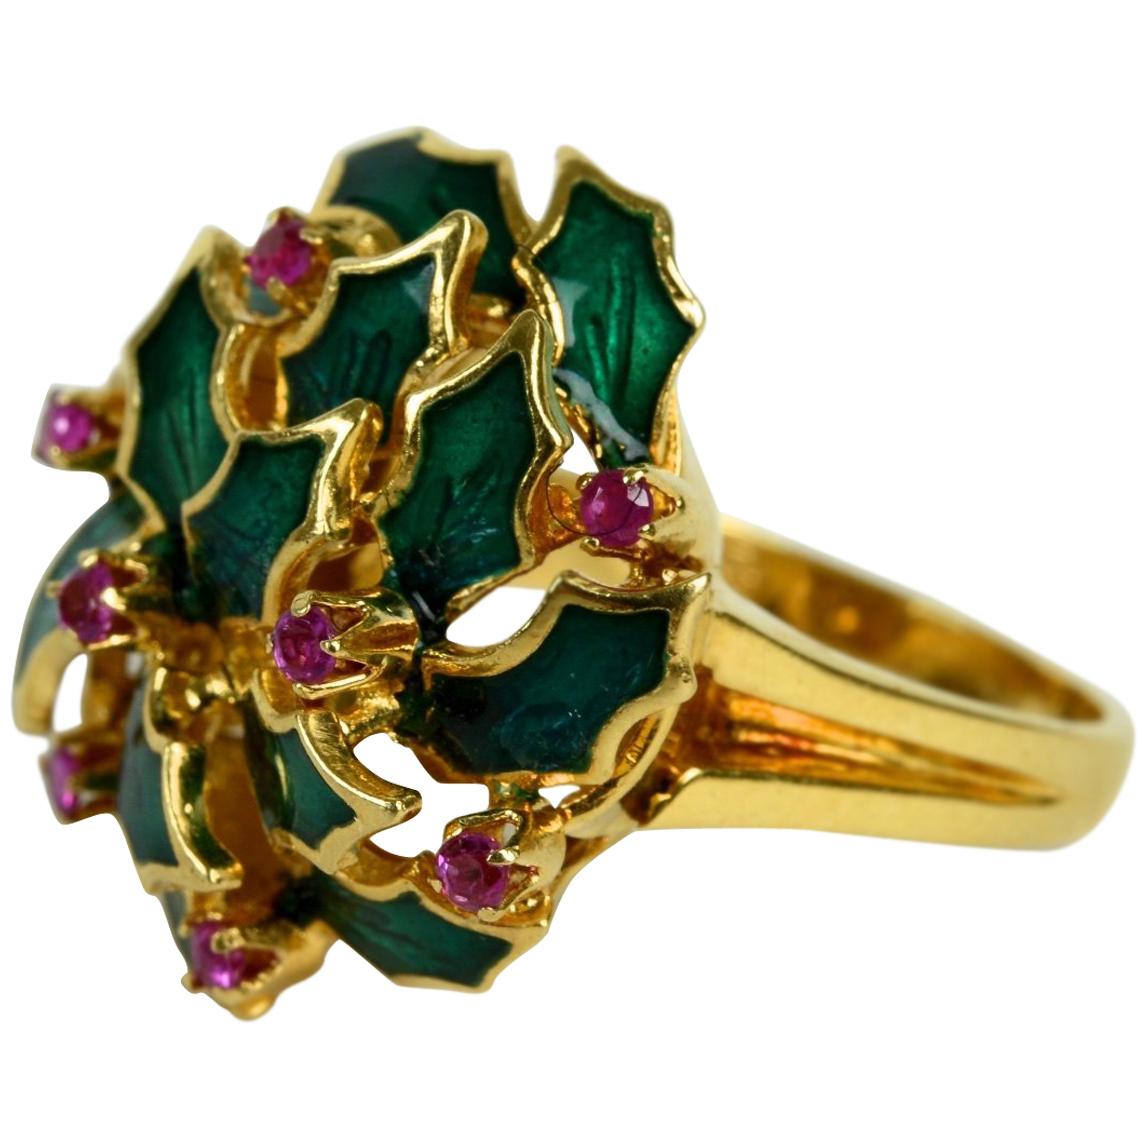 Enameled Ring, Holly and Berry Decoration Set with Pink Topaz in 18K Gold